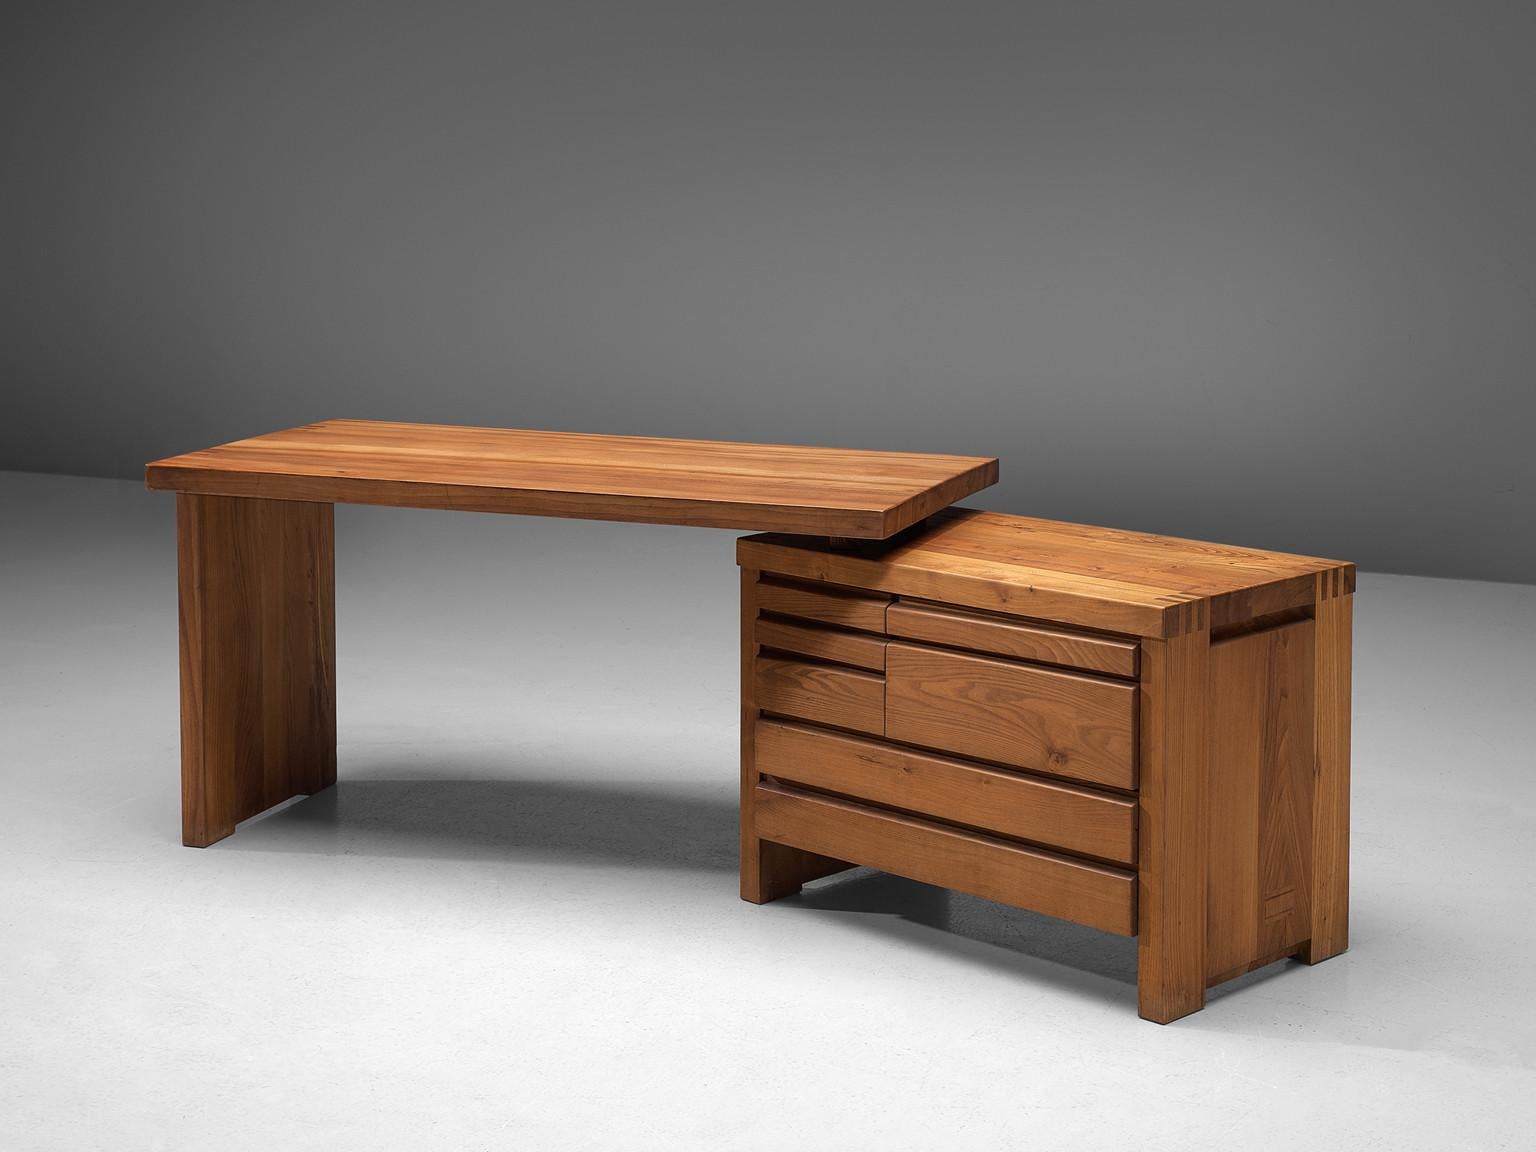 Pierre Chapo, desk model B19, elm, France, 1960s.

Executive desk in elmwood. The simplicity of this design is it's strength. The quality of the elmwood structure is sublime, it's kept together with beautifully made wooden joints. The storage part